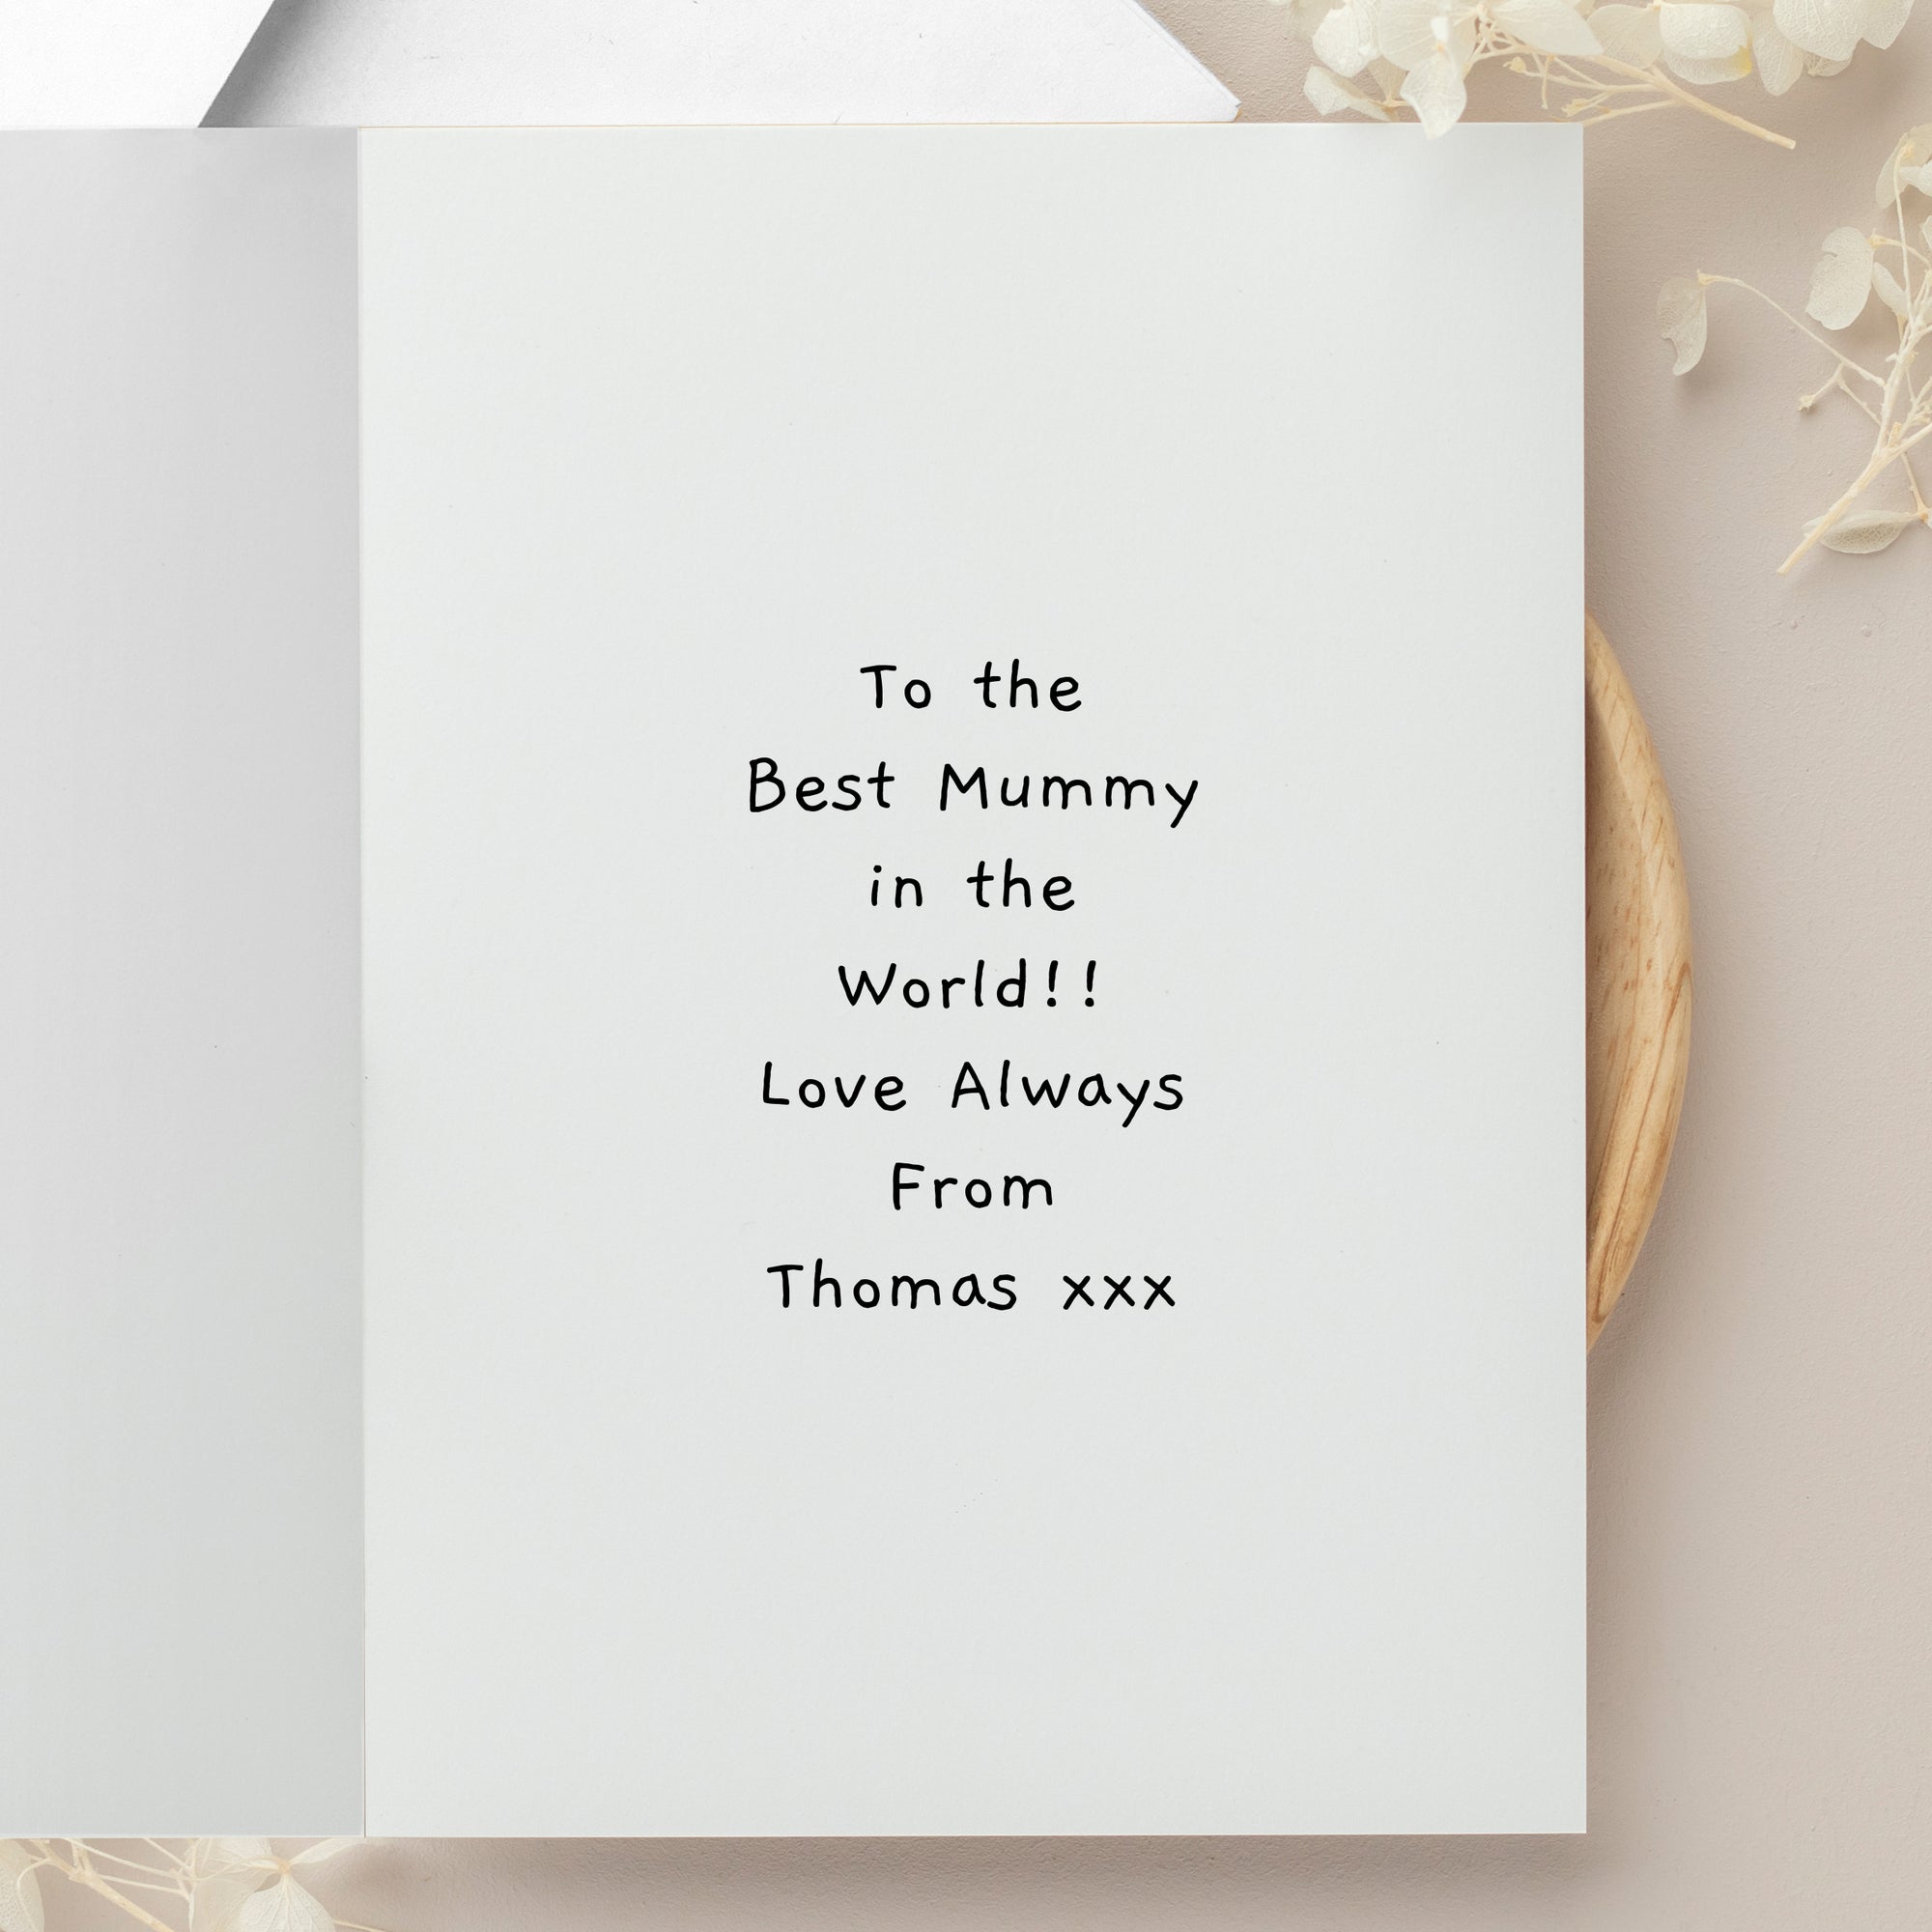 Image of a greetings card which has your own artwork printed on the front. The insider of the card can be personalised with your own text over up to 7 lines which will be printed in a black handwritten style font. The card comes with a white envelope.